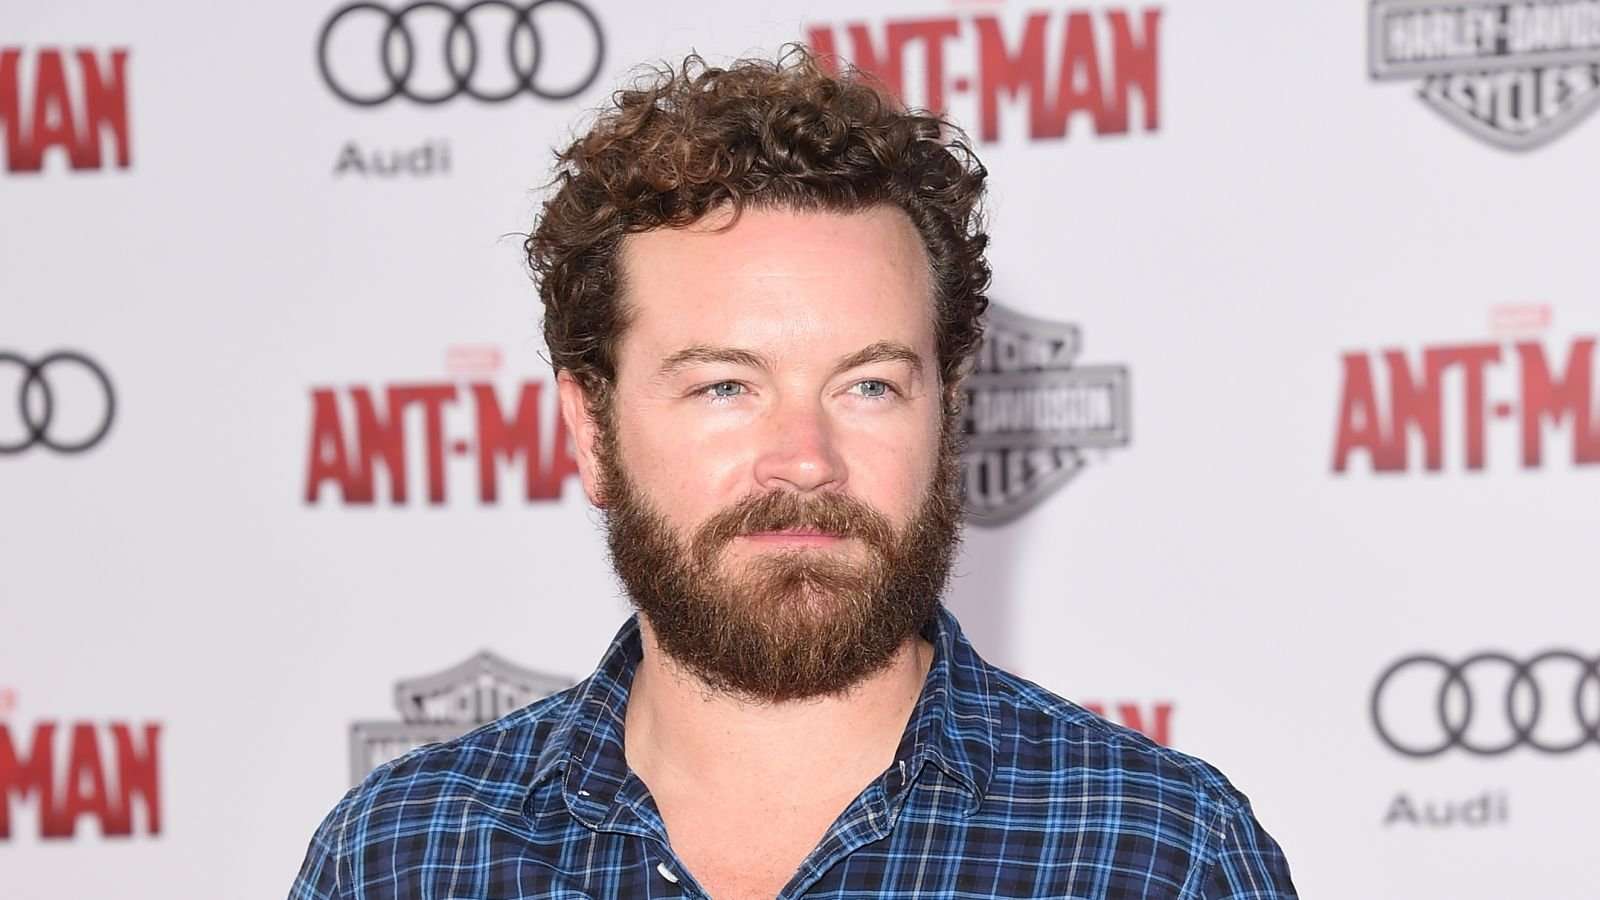 image for Leah Remini believes the LAPD is covering for Scientologists like Danny Masterson